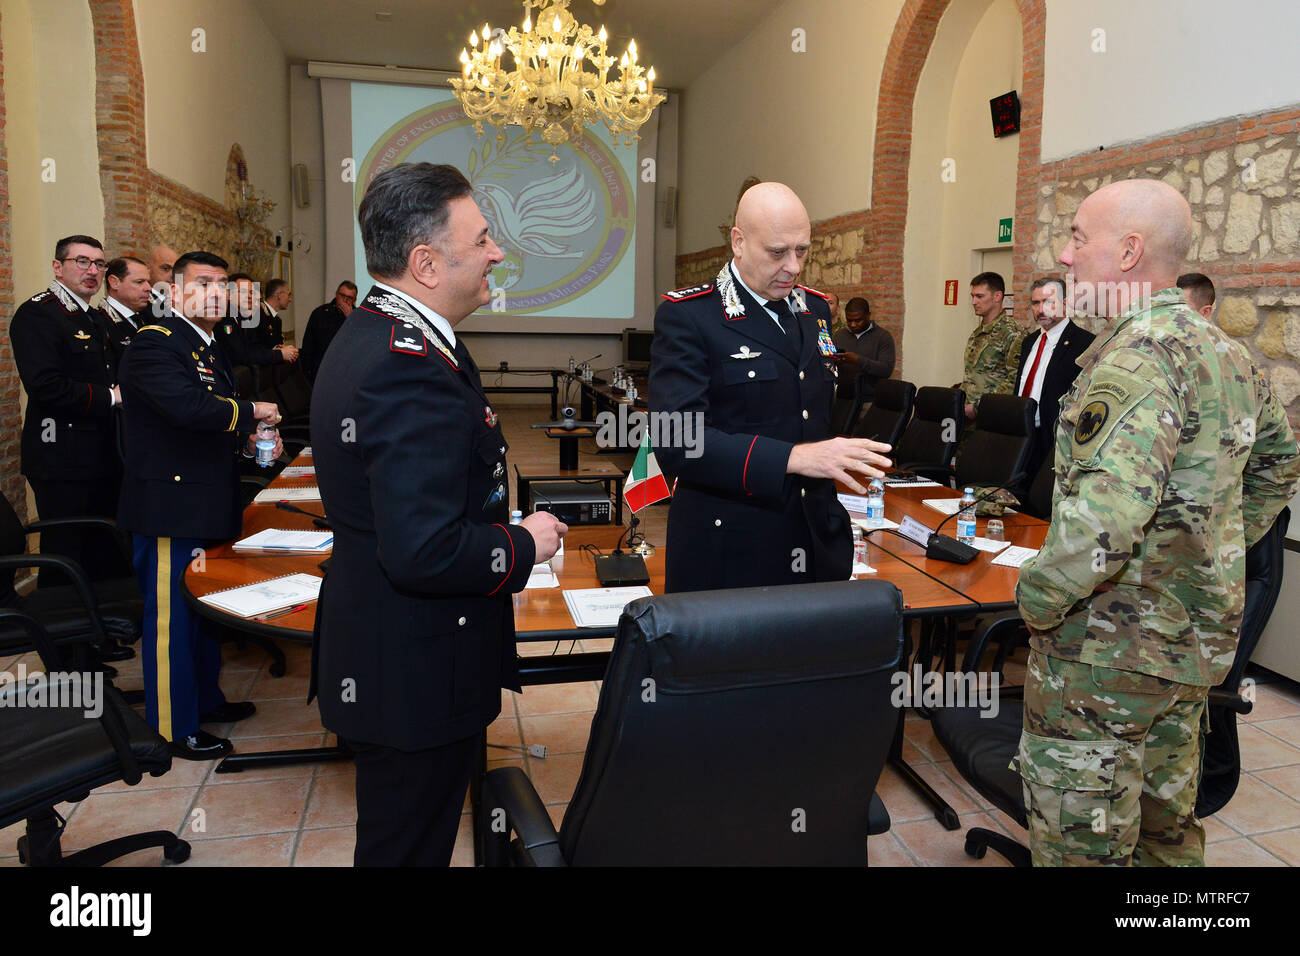 Brig. Gen. Giovanni Pietro Barbano (right), Center of Excellence for Stability Police Units (CoESPU) director, Lt. Gen Vincenzo Coppola (center), Commanding General “Palidoro” Carabinieri Specialized and Mobile Units, Lt. Gen. Charles D. Luckey (left), Commanding General U.S. Army Reserve Command, talk during visit at Center of Excellence for Stability Police Units (CoESPU) Vicenza, Italy, January 20, 2017.(U.S. Army Photo by Visual Information Specialist Paolo Bovo/released) Stock Photo